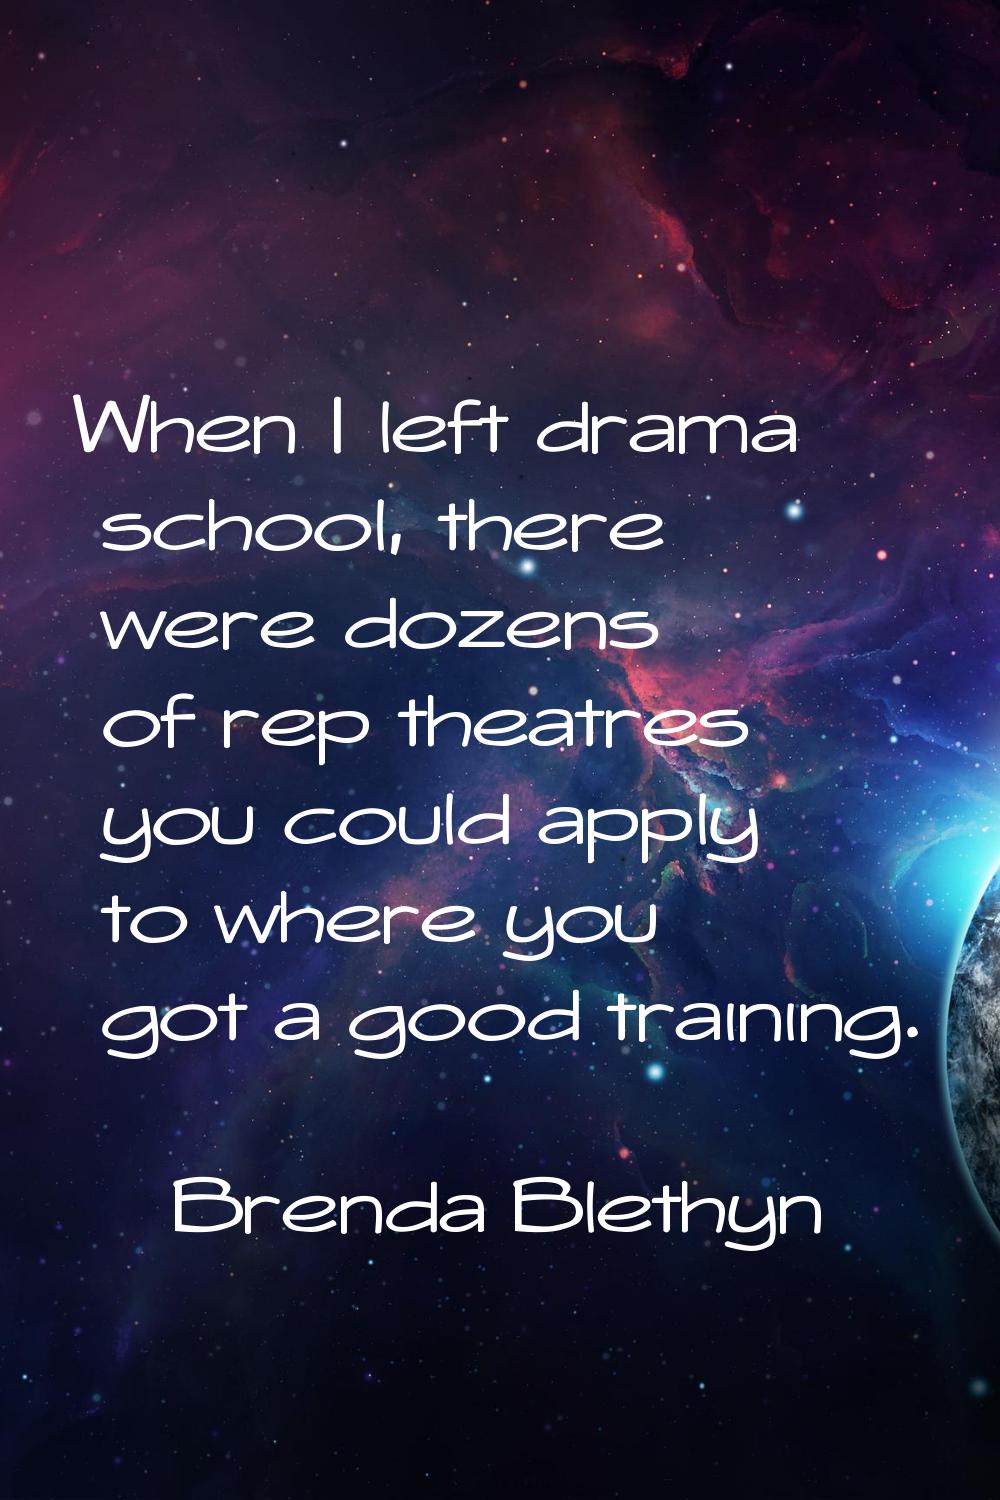 When I left drama school, there were dozens of rep theatres you could apply to where you got a good